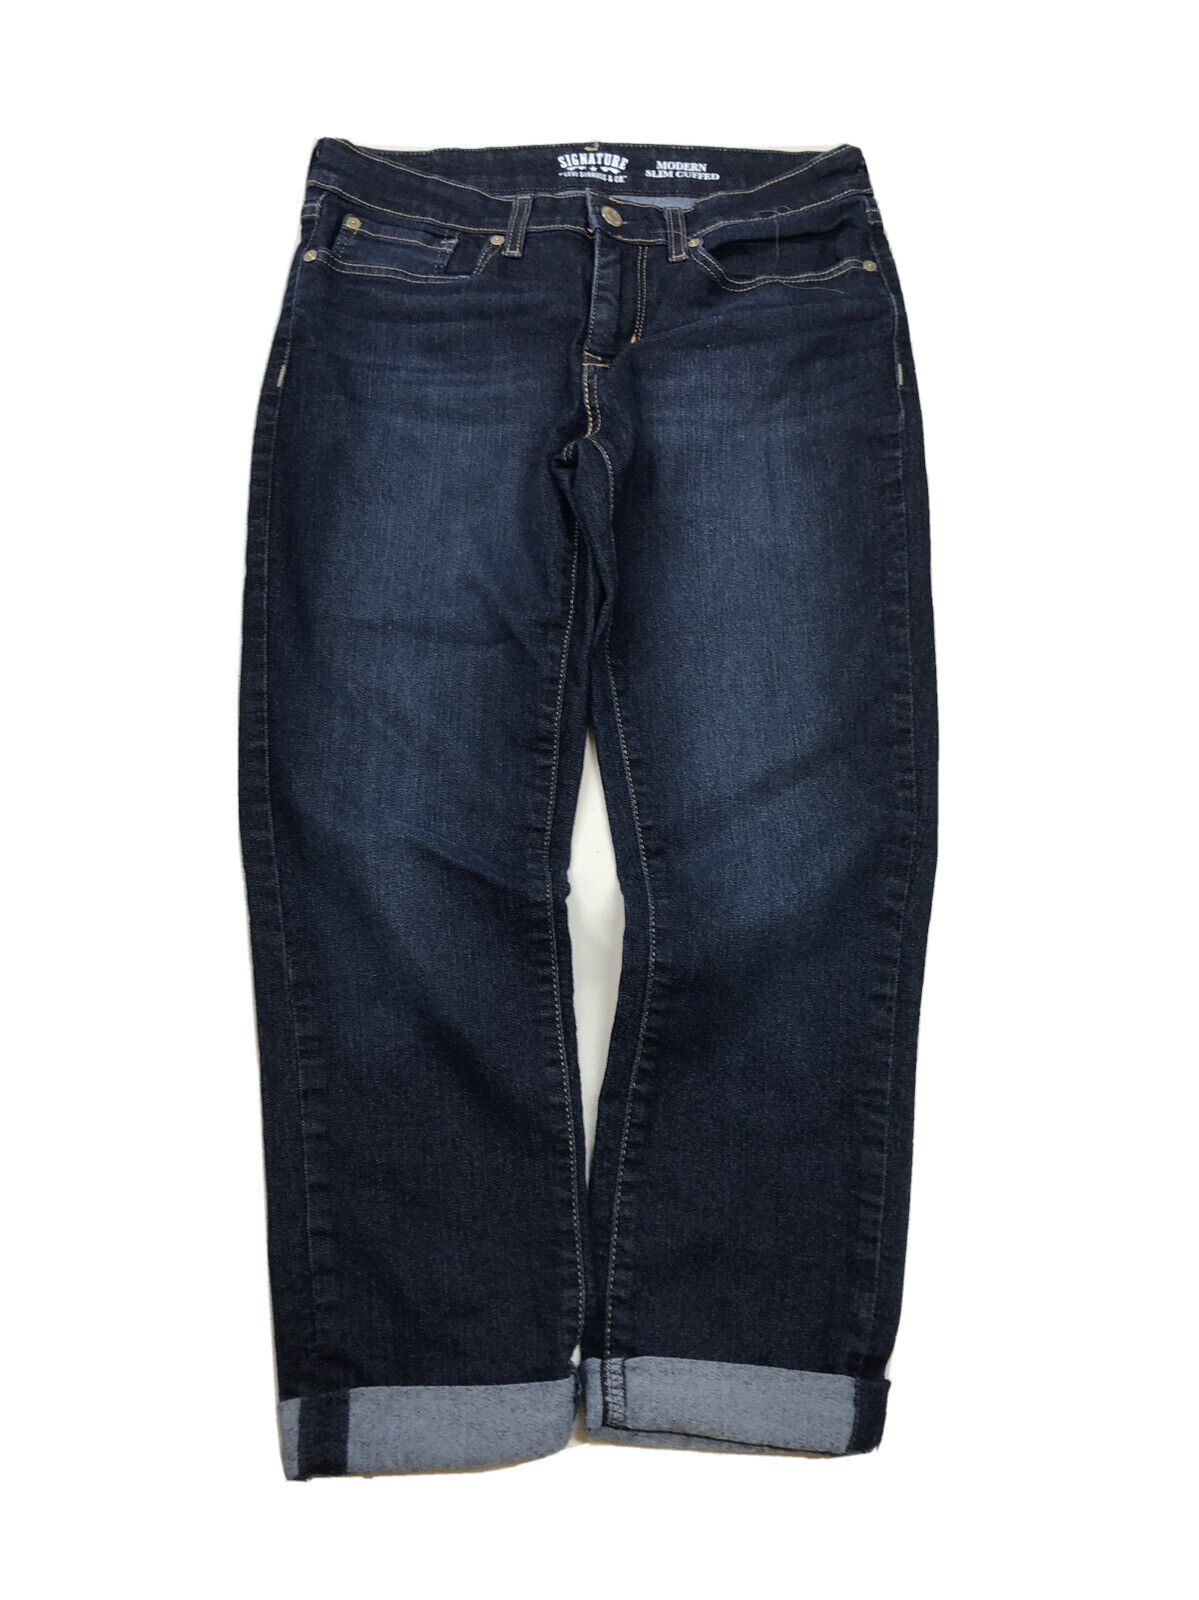 Levi's Signature Women's Dark Wash Modern Slim Cuff Ankle Jeans - 10 – The  Resell Club